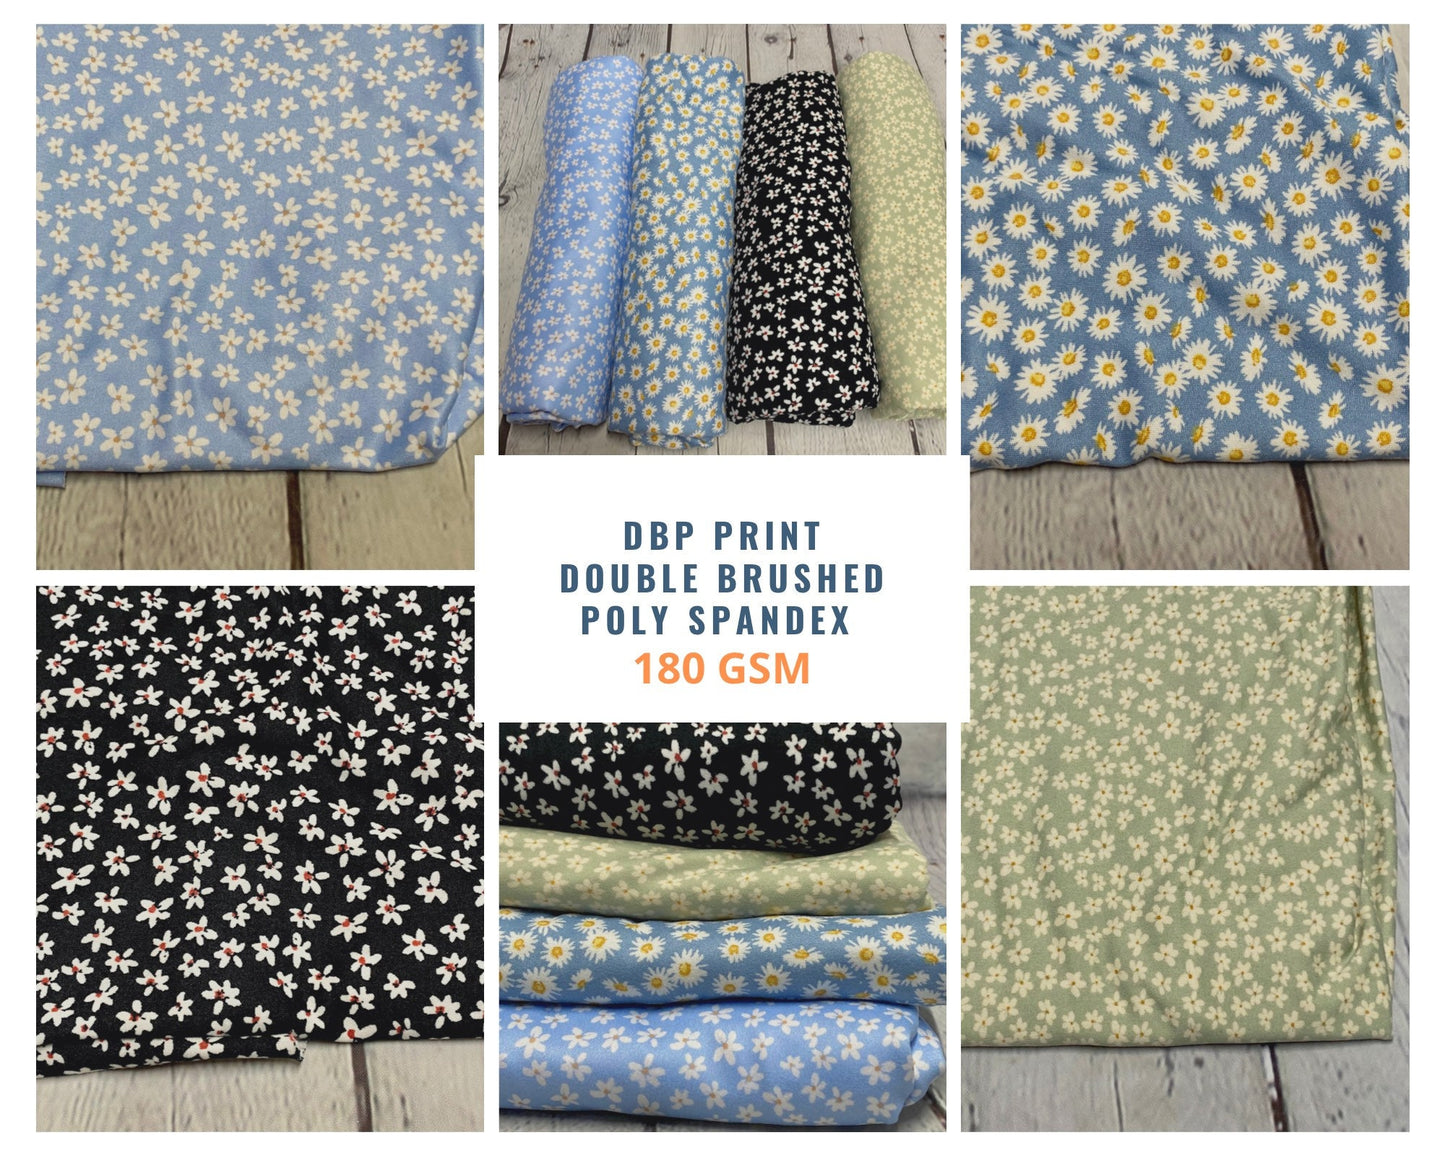 DBP Double Brushed Poly Spandex Print Mini Daisy  Flower Floral Print By The Yard